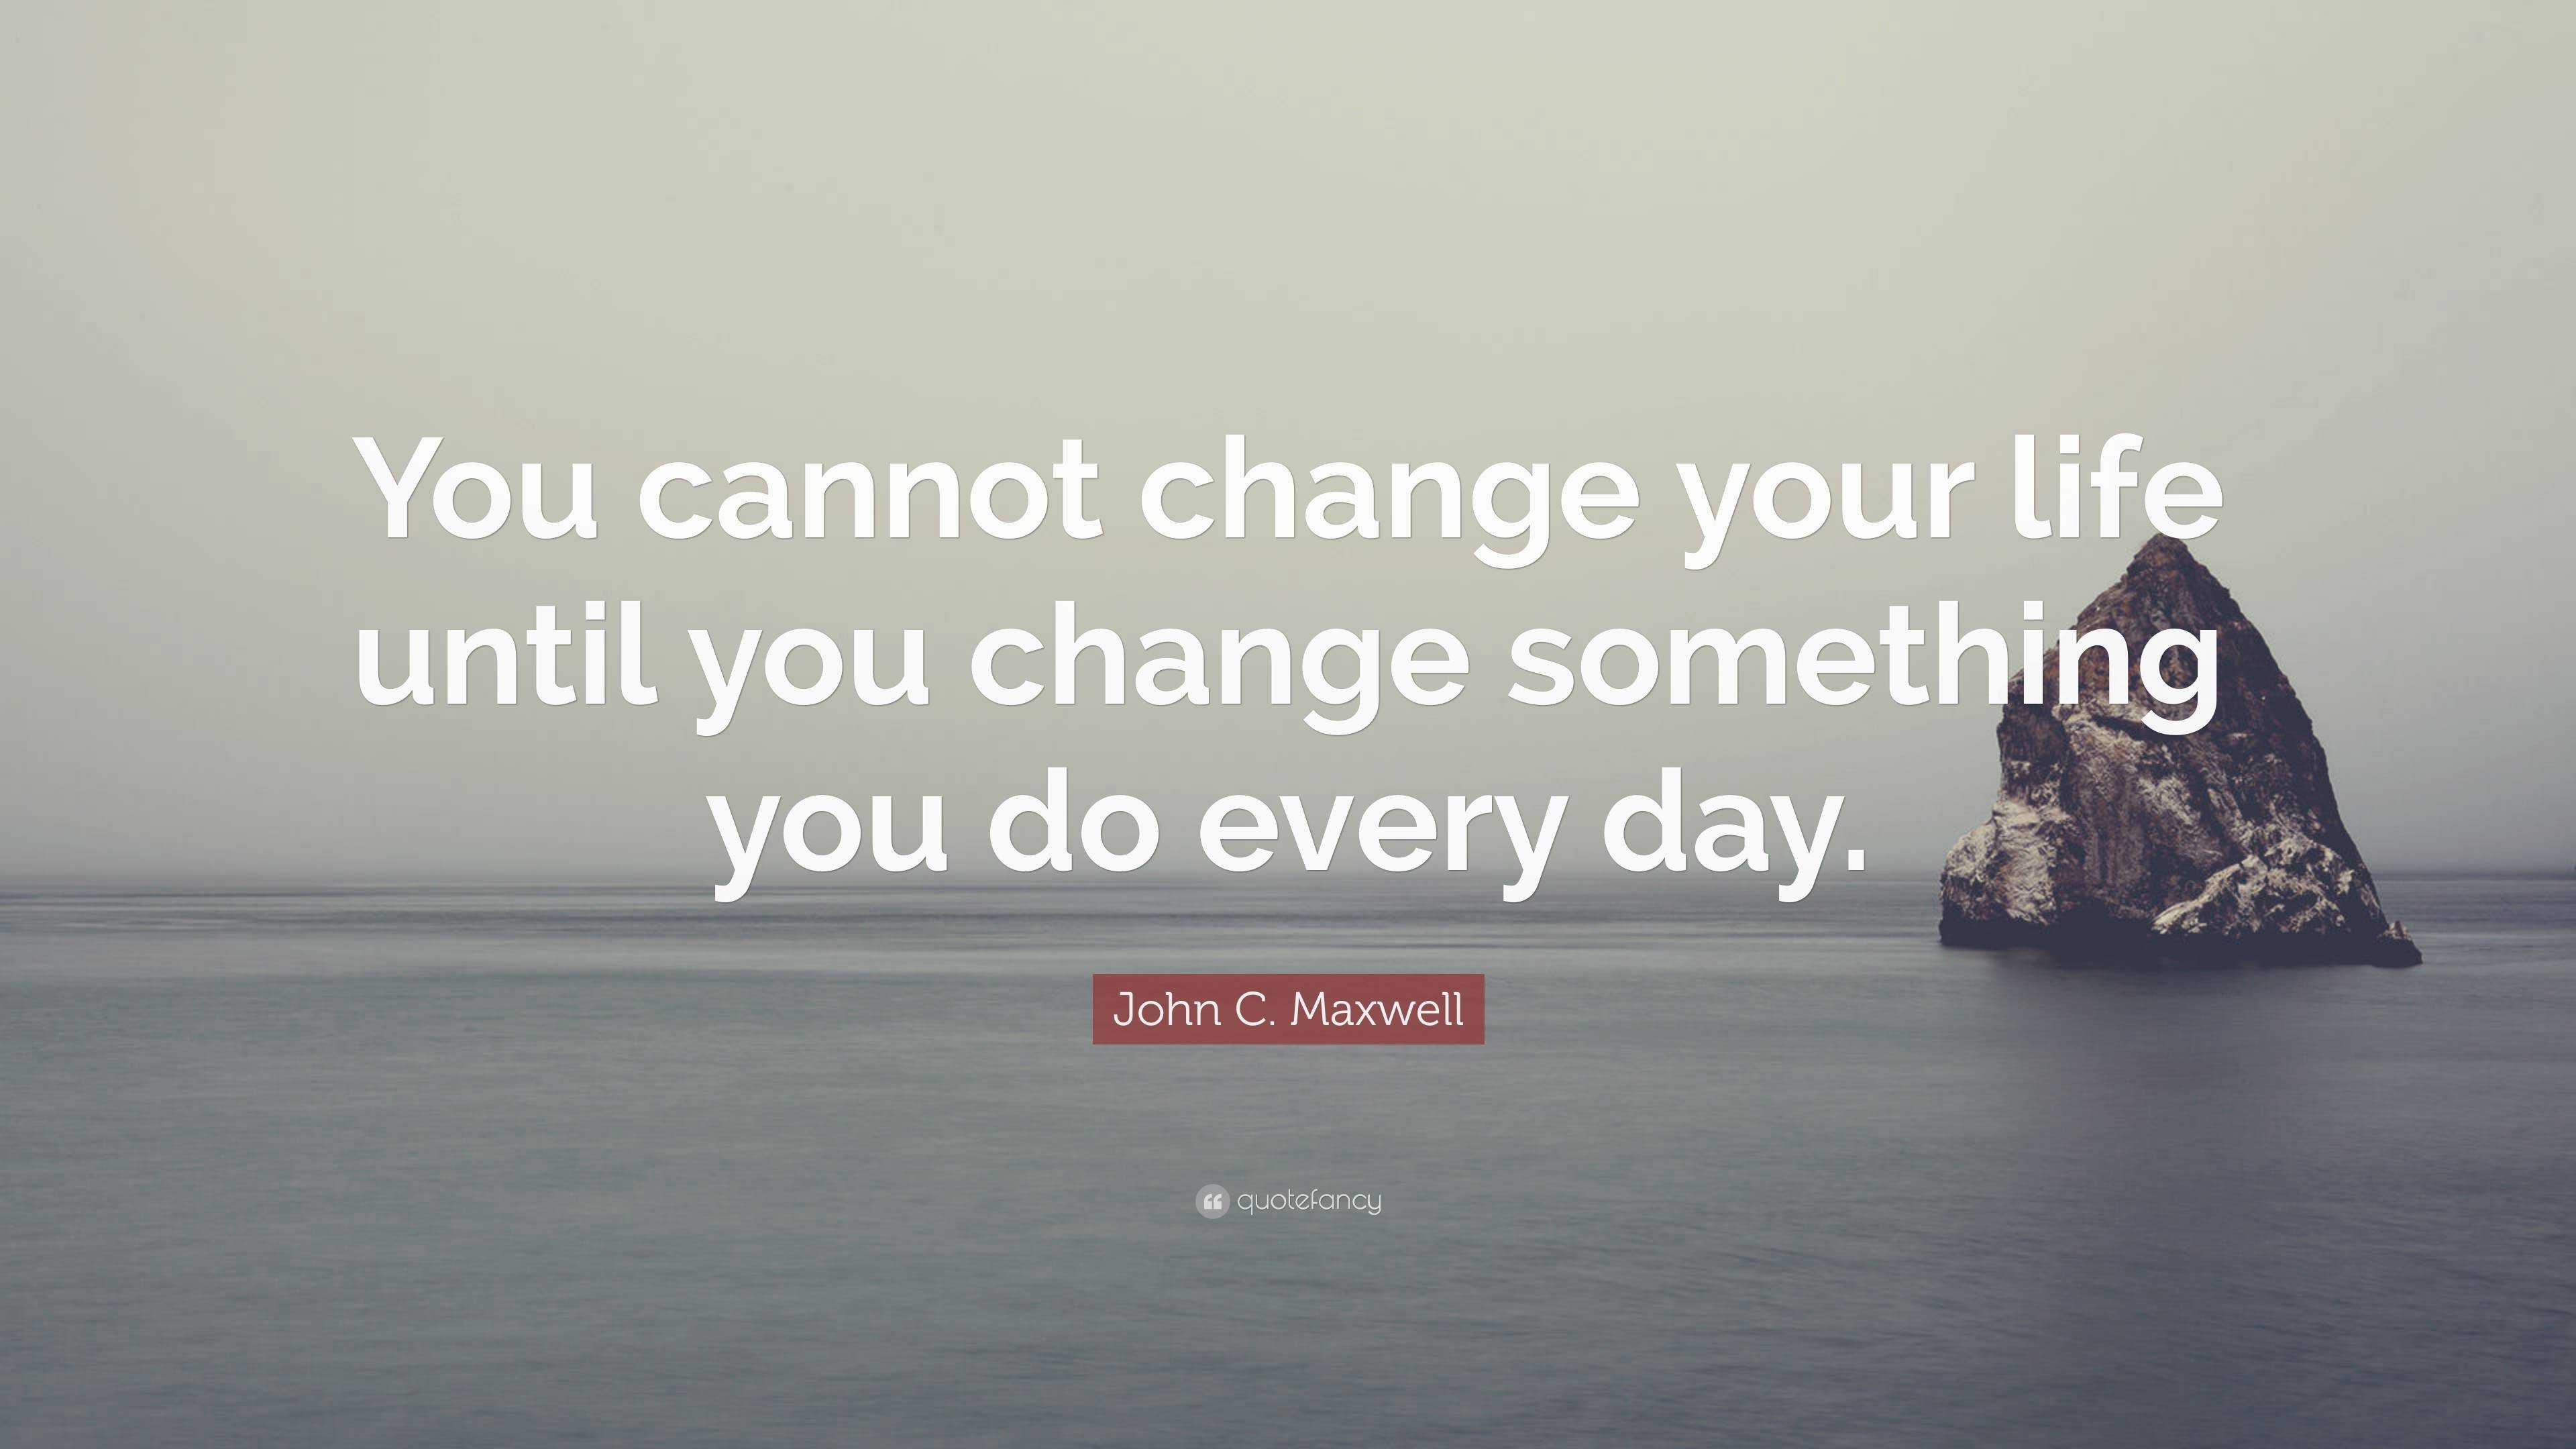 John C. Maxwell Quote: “You cannot change your life until you change ...